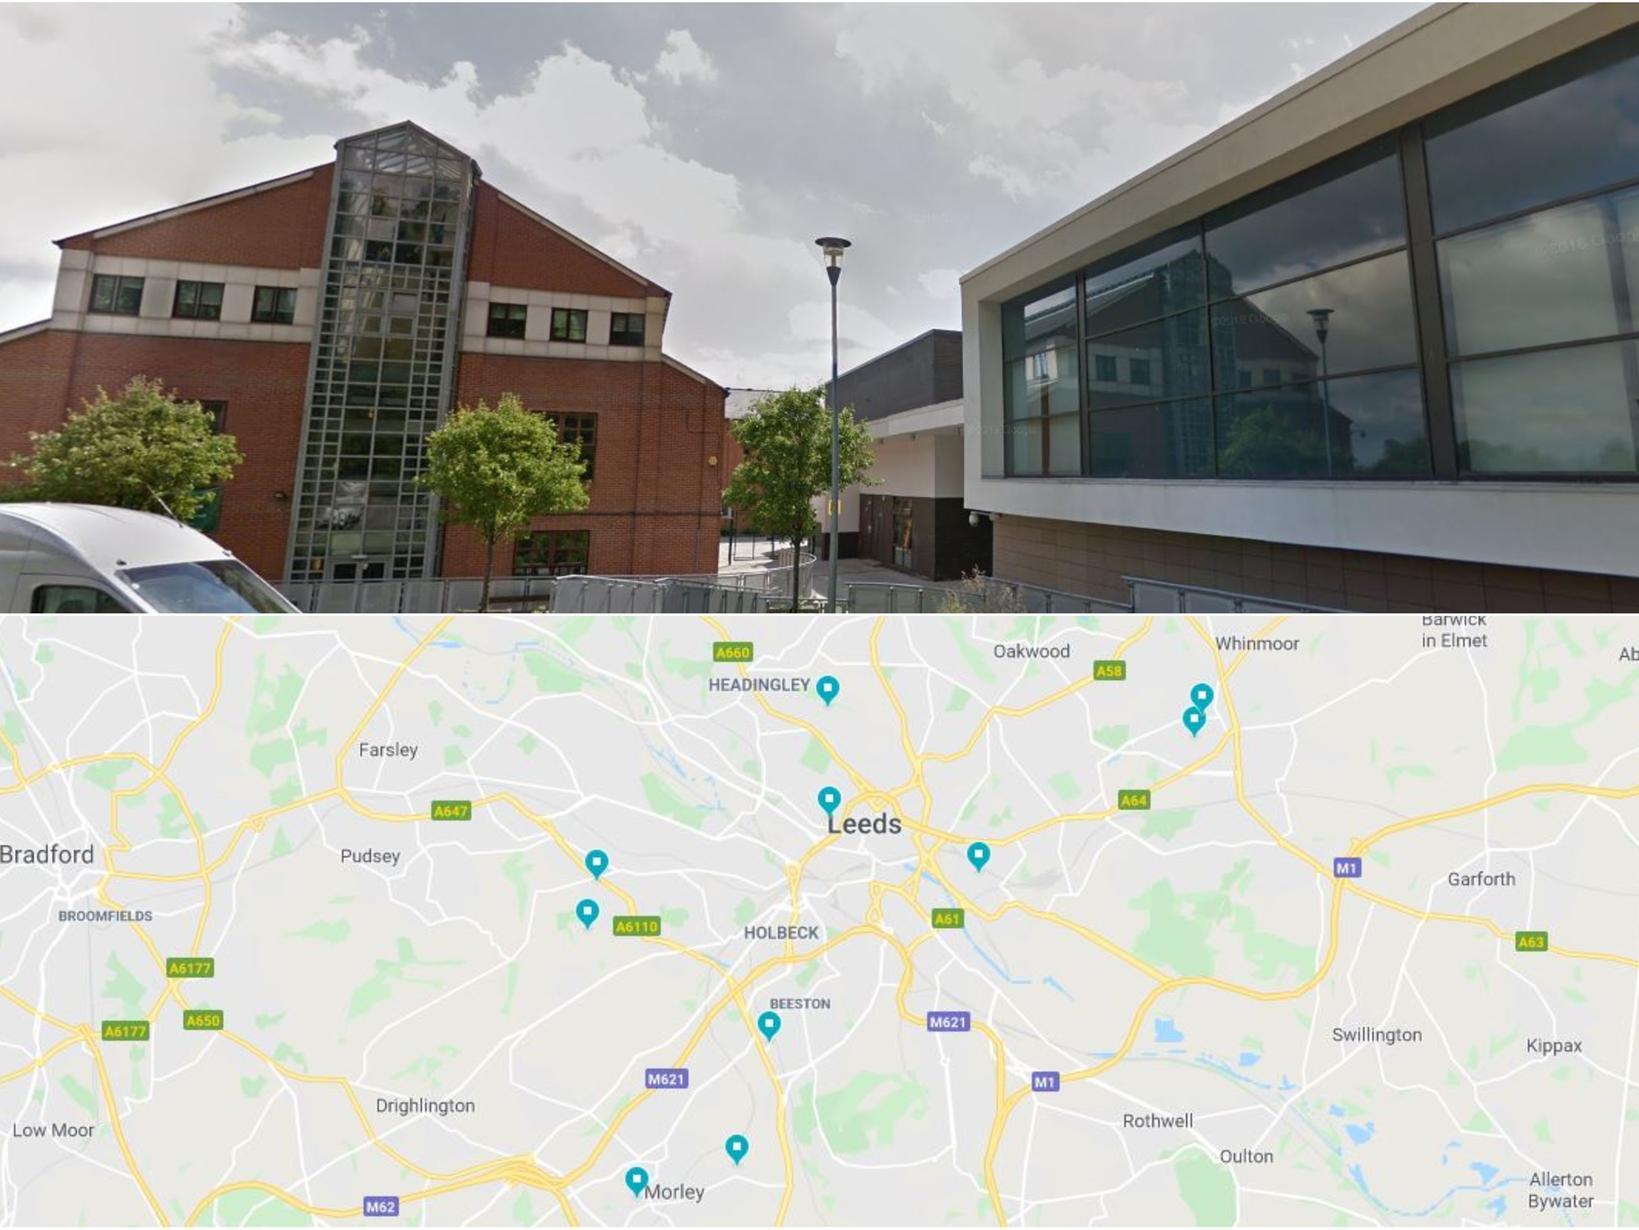 Every school in Leeds we know has been hit by Norovirus outbreak - listed